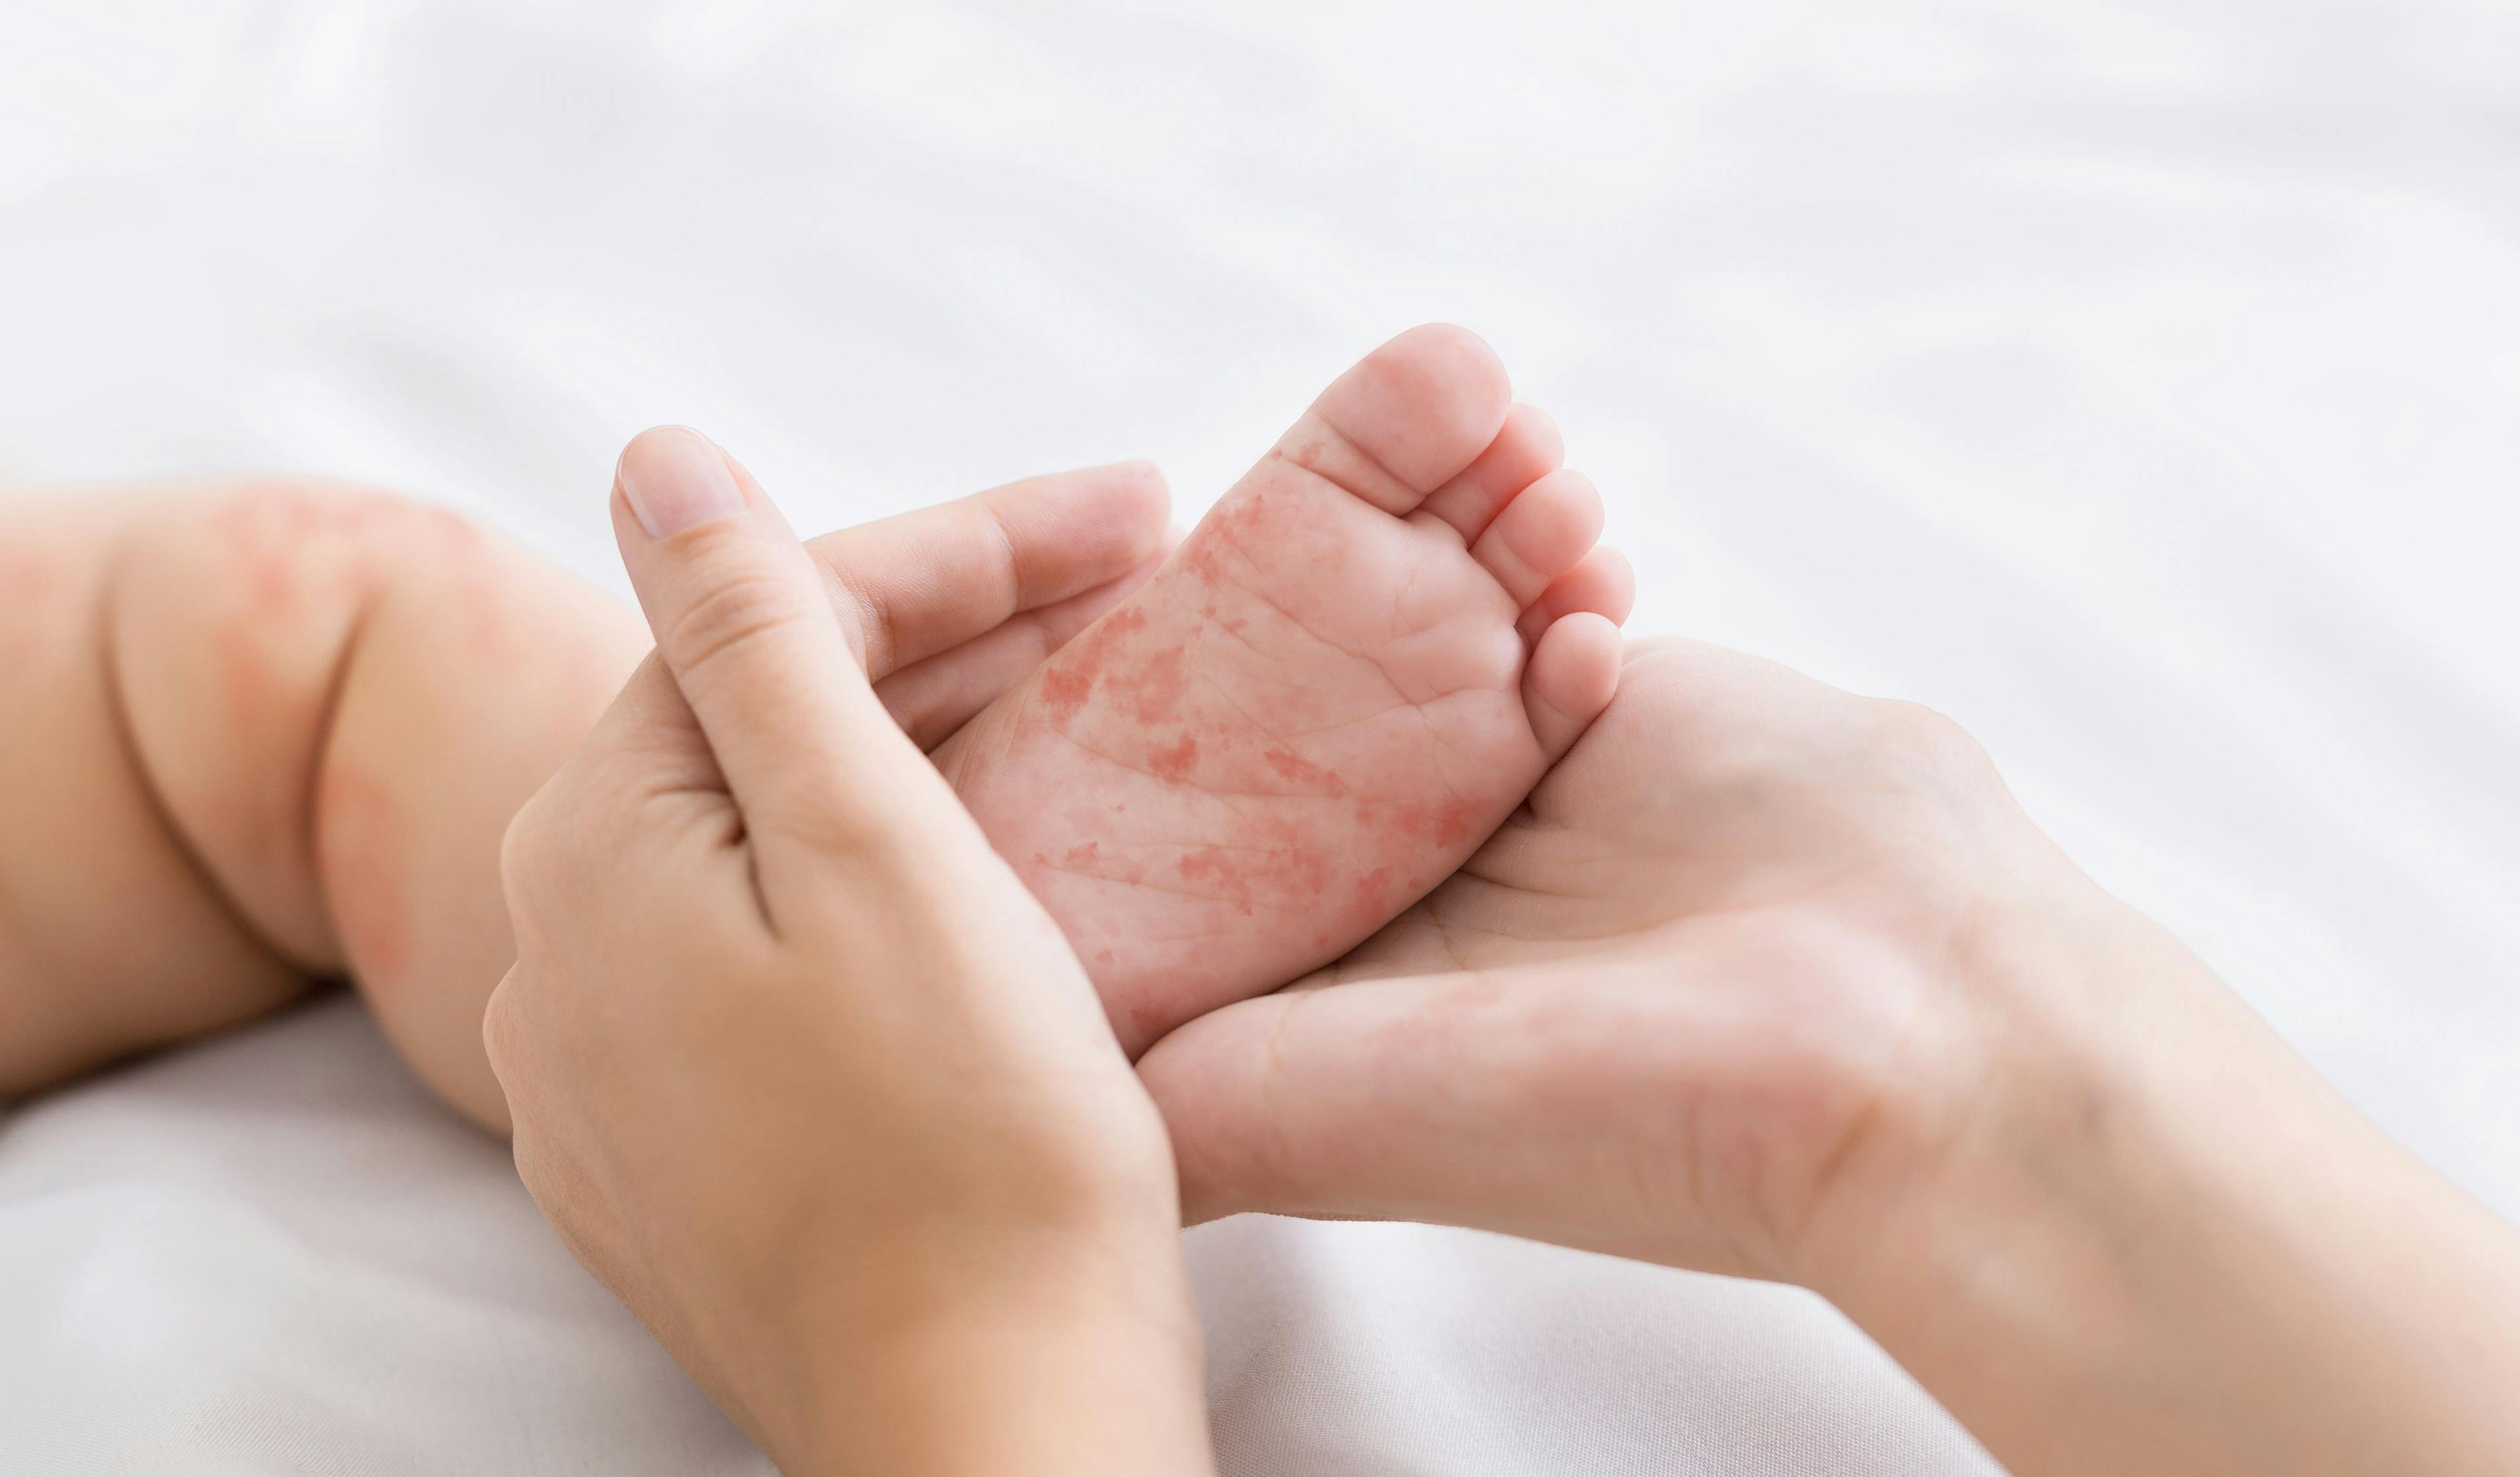 Children at greater risk of measles infection